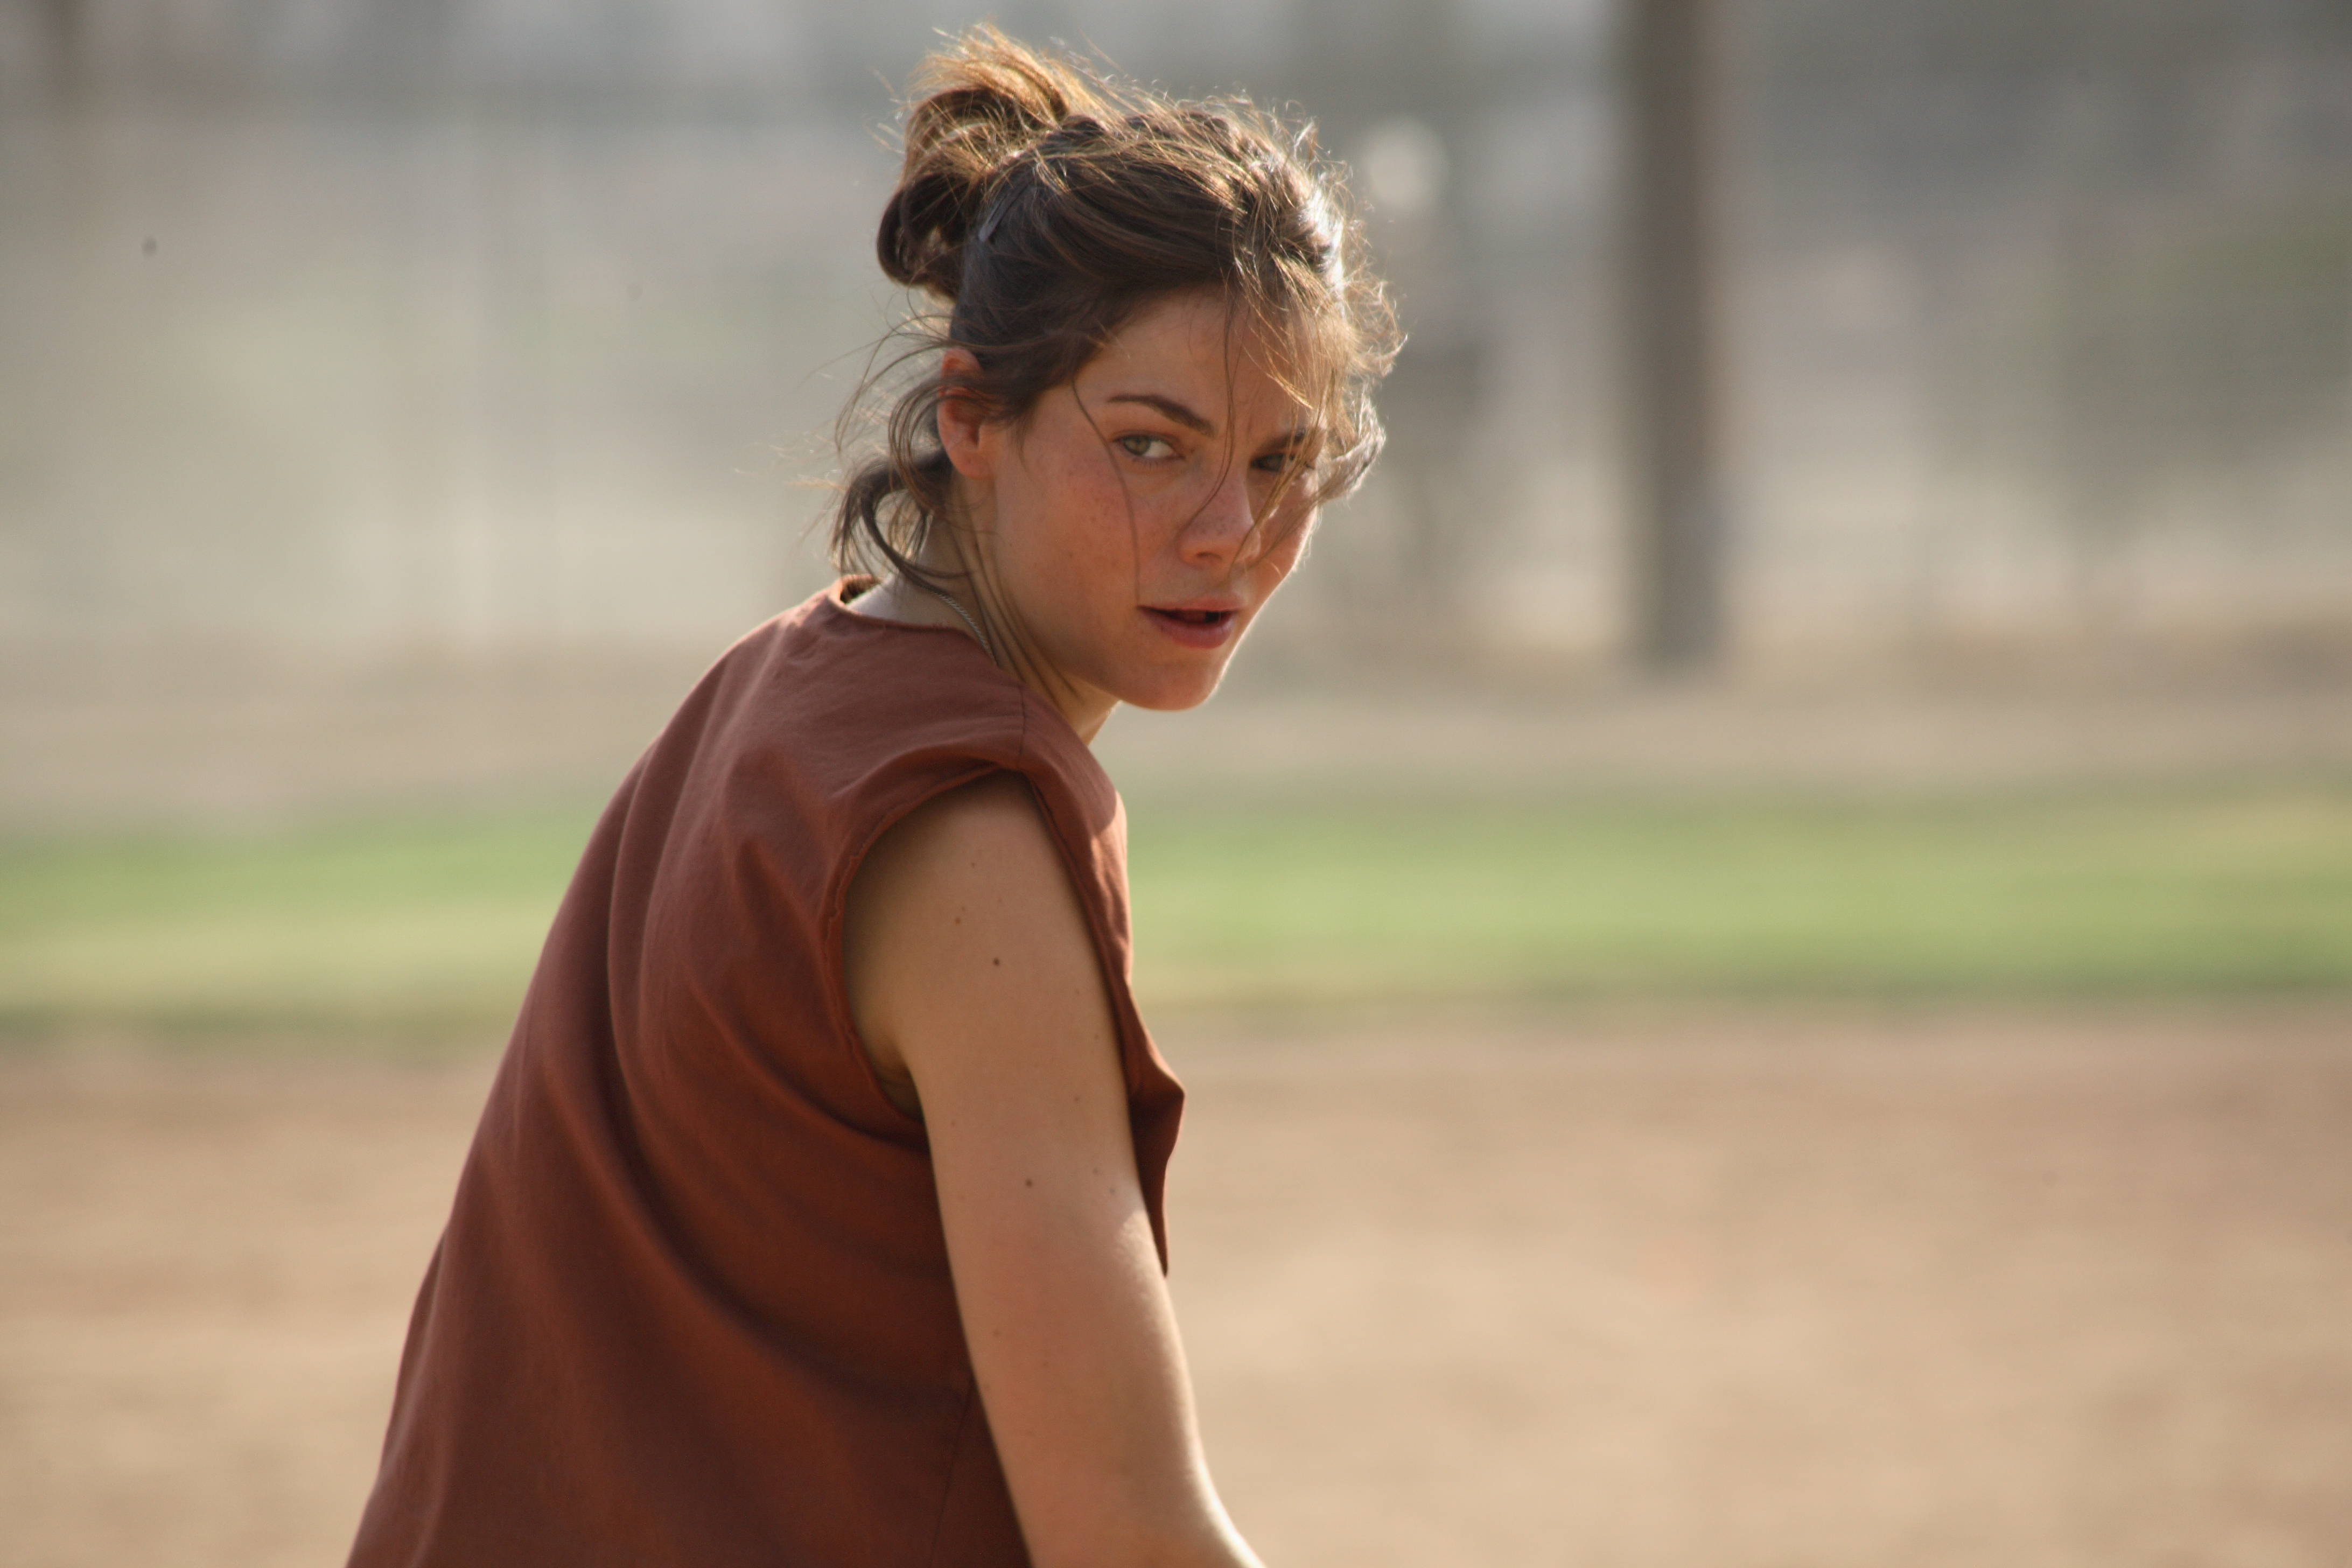 Michelle Monaghan as Diane Ford in TRUCKER.